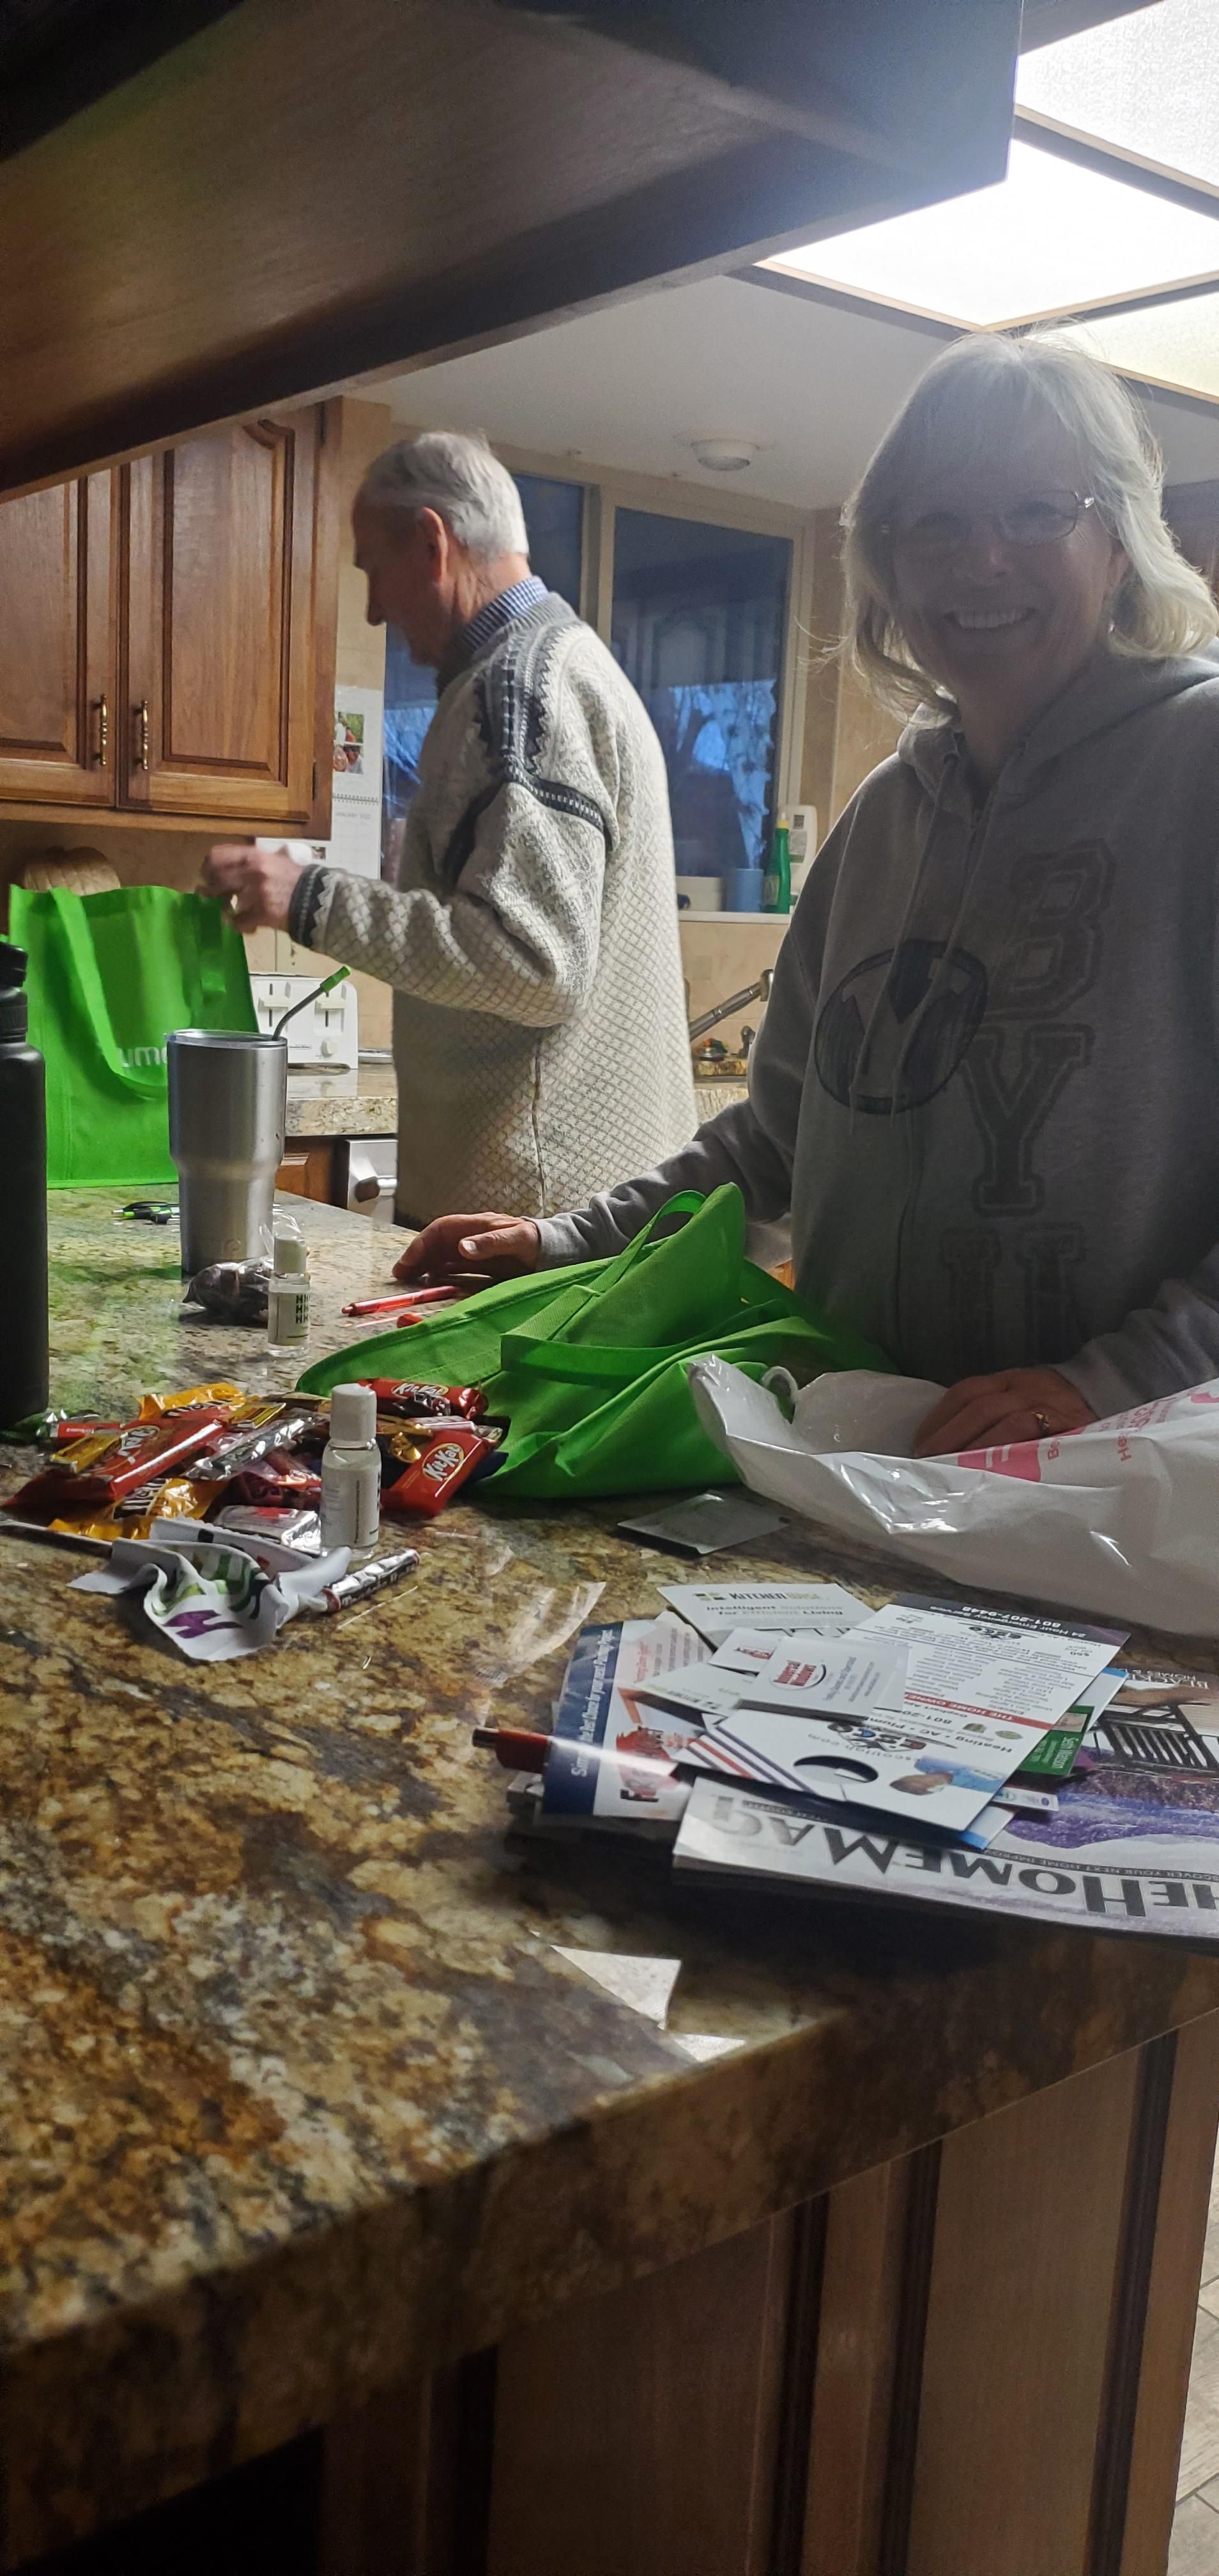 My grandparents went to a Home Show at the Expo Center, and apparently it's trick or treating for old people